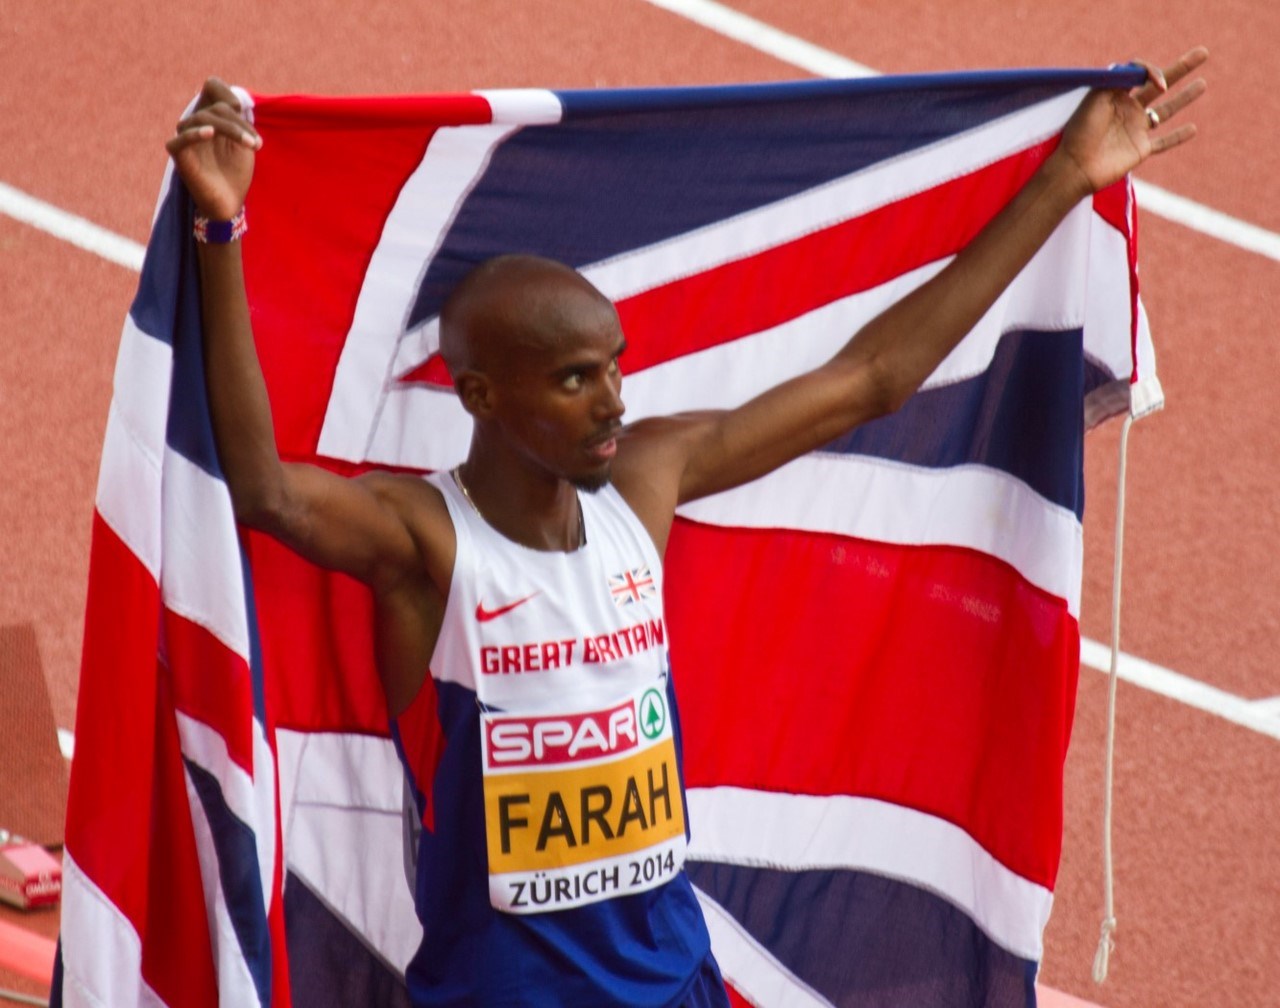 Picture of Olympic Super-Star, Sir Mo Farah (Hussein Abdi Kahin) Victim of Trafficking